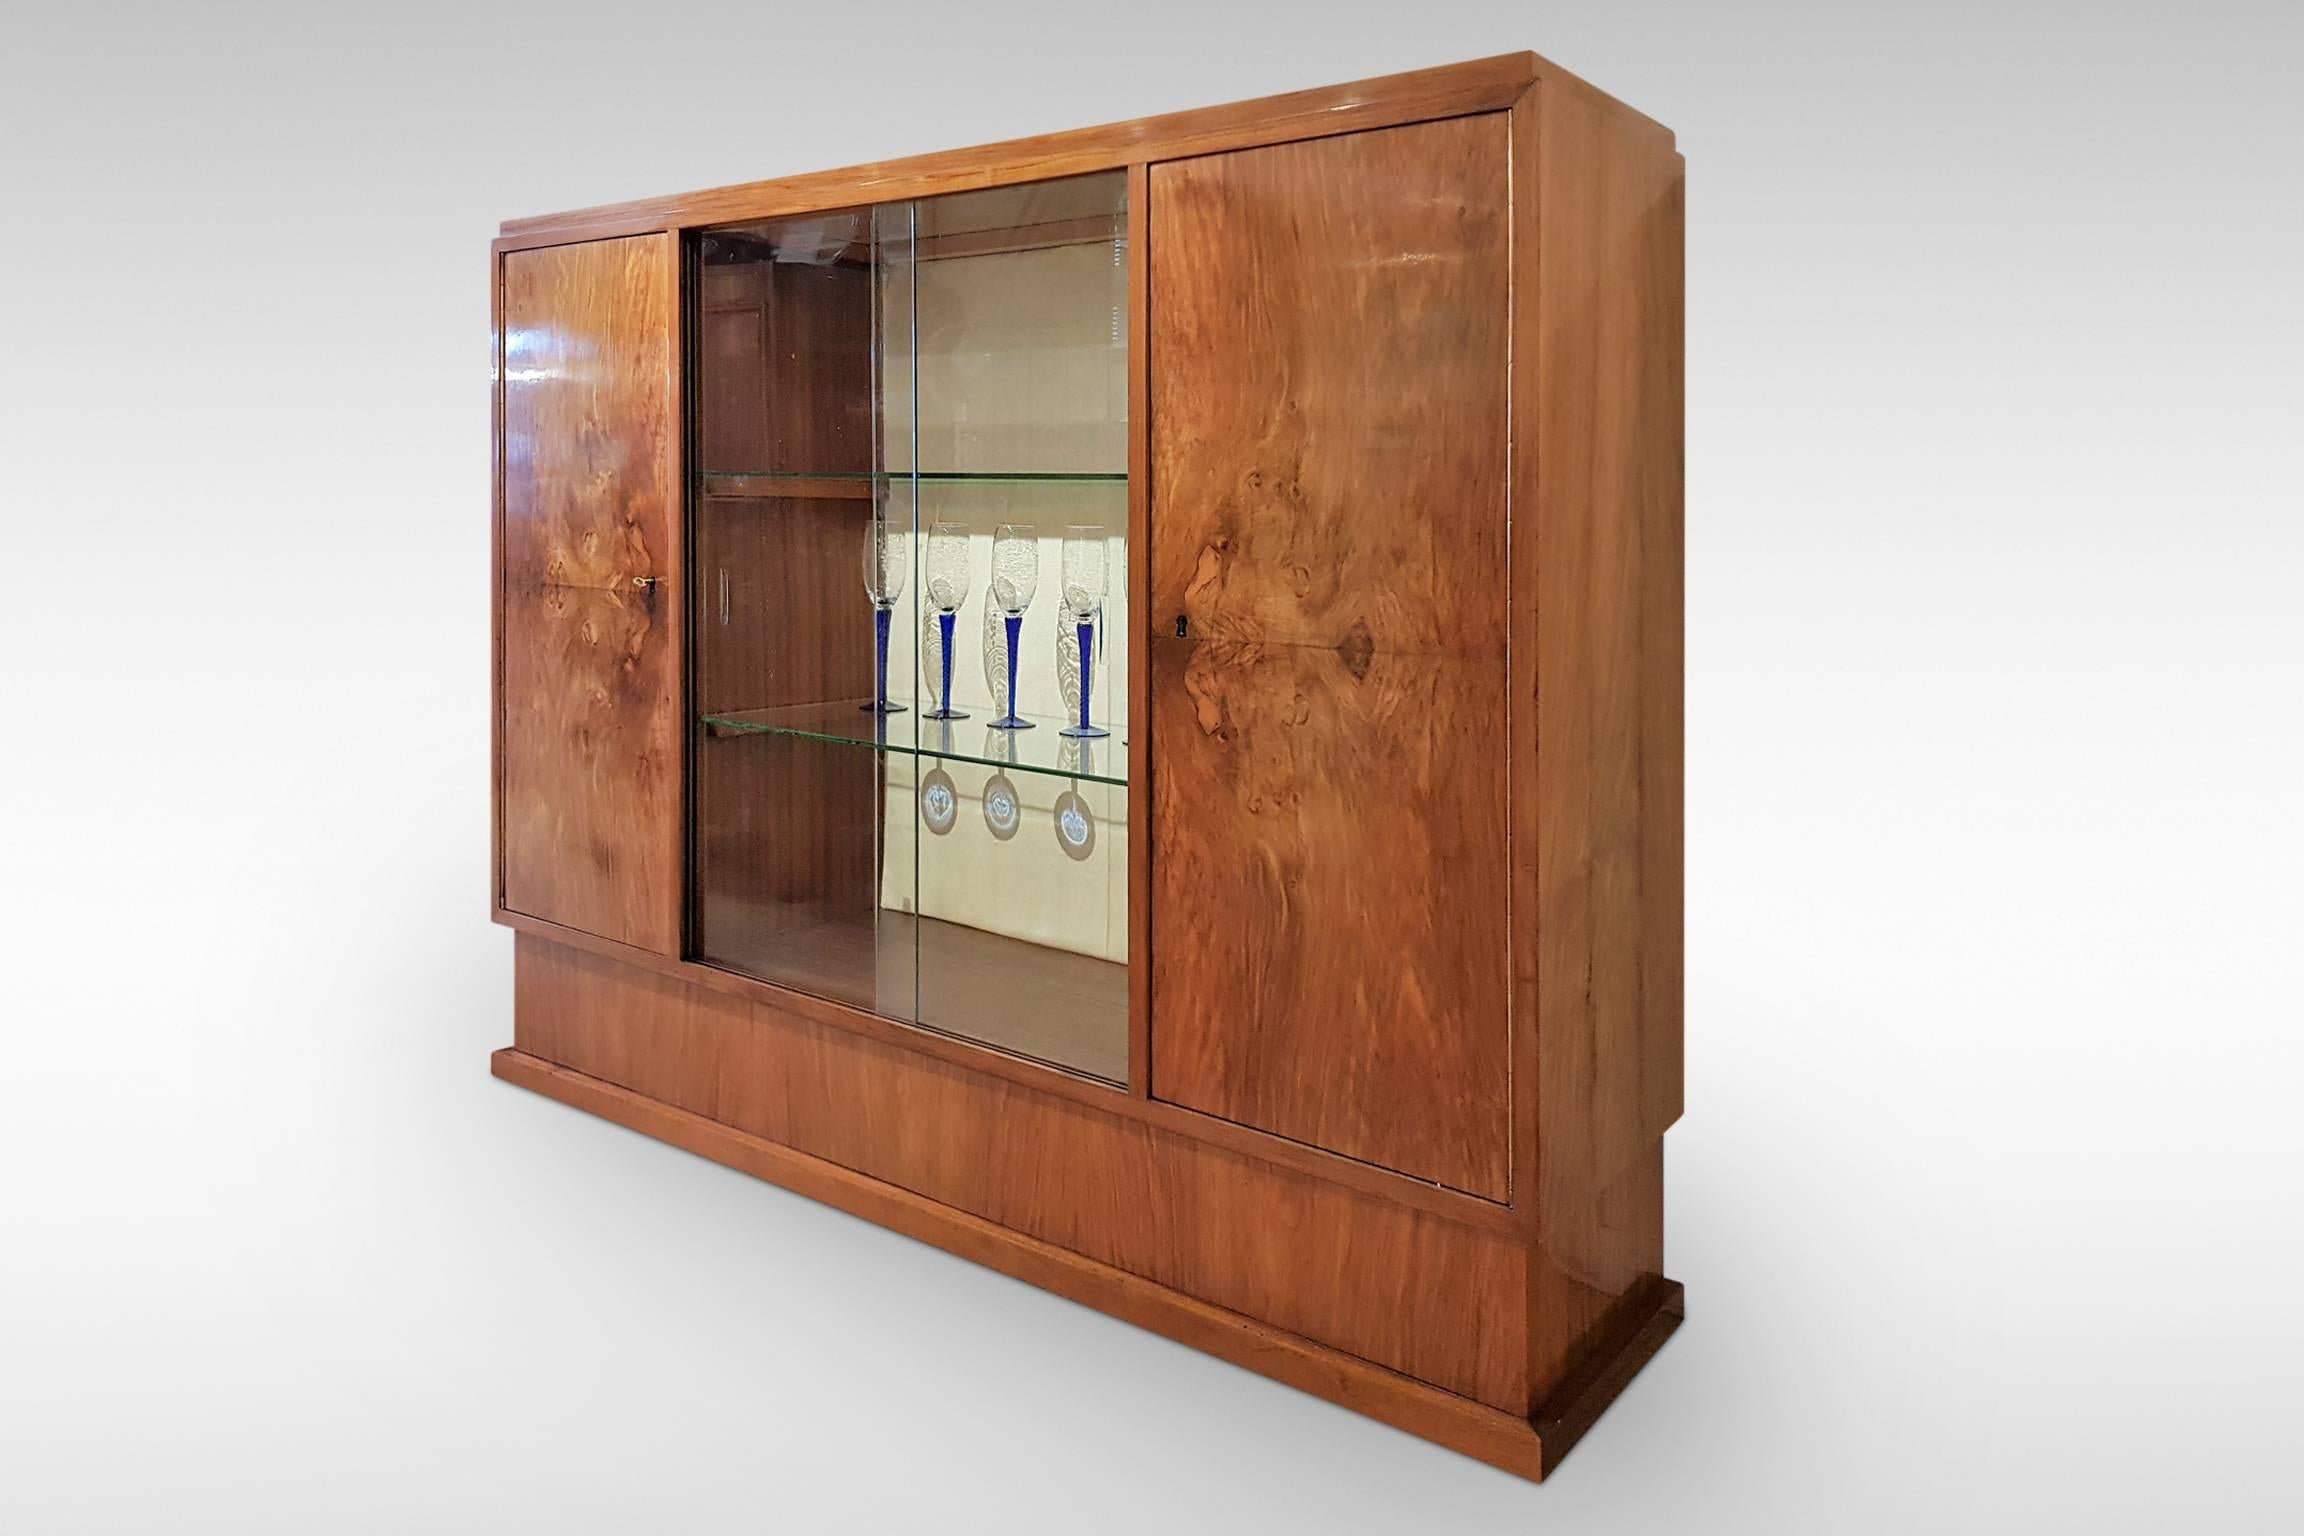 A handsome and fine quality modernist display cabinet from the Art Deco period. It has stunning figured Walnut veneers and features piano hinges to the flanking cupboard doors.